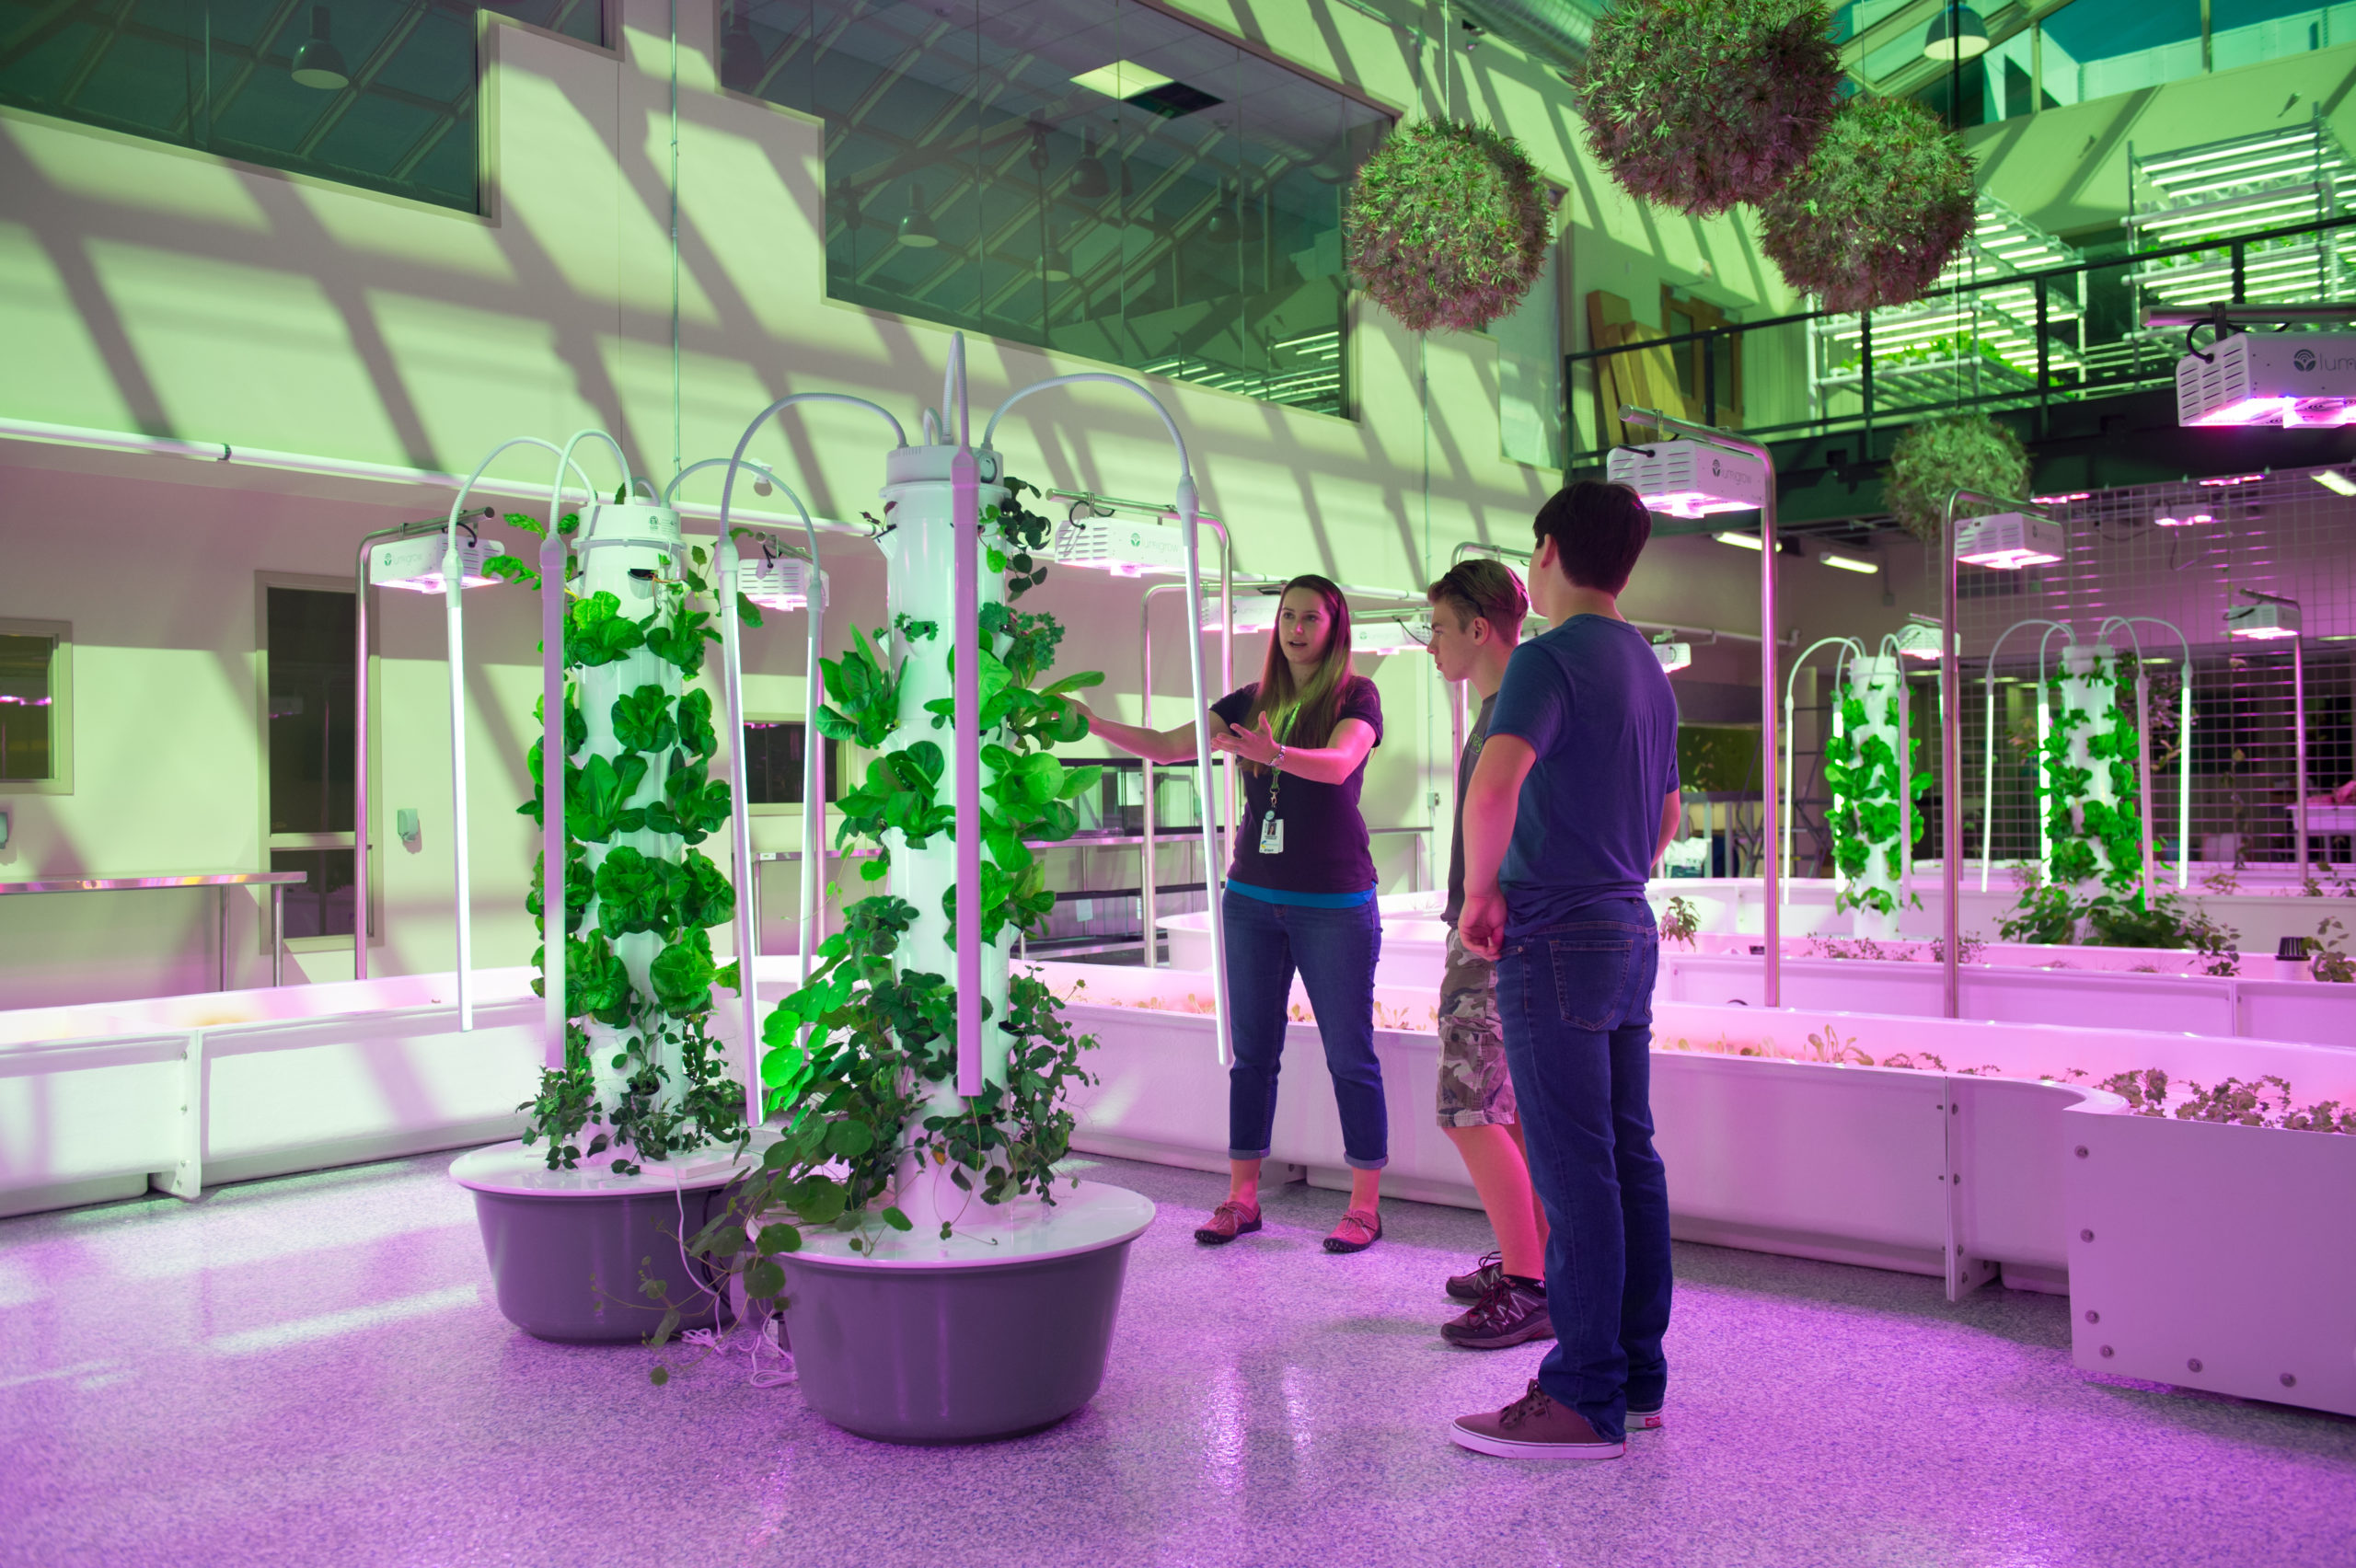 AgWorks uses two hydroponic growing wheels and hydroponic vertical gardens. Hershey Company donated an almond tree so students can test whether they can generate more almonds aquaponically than with soil.